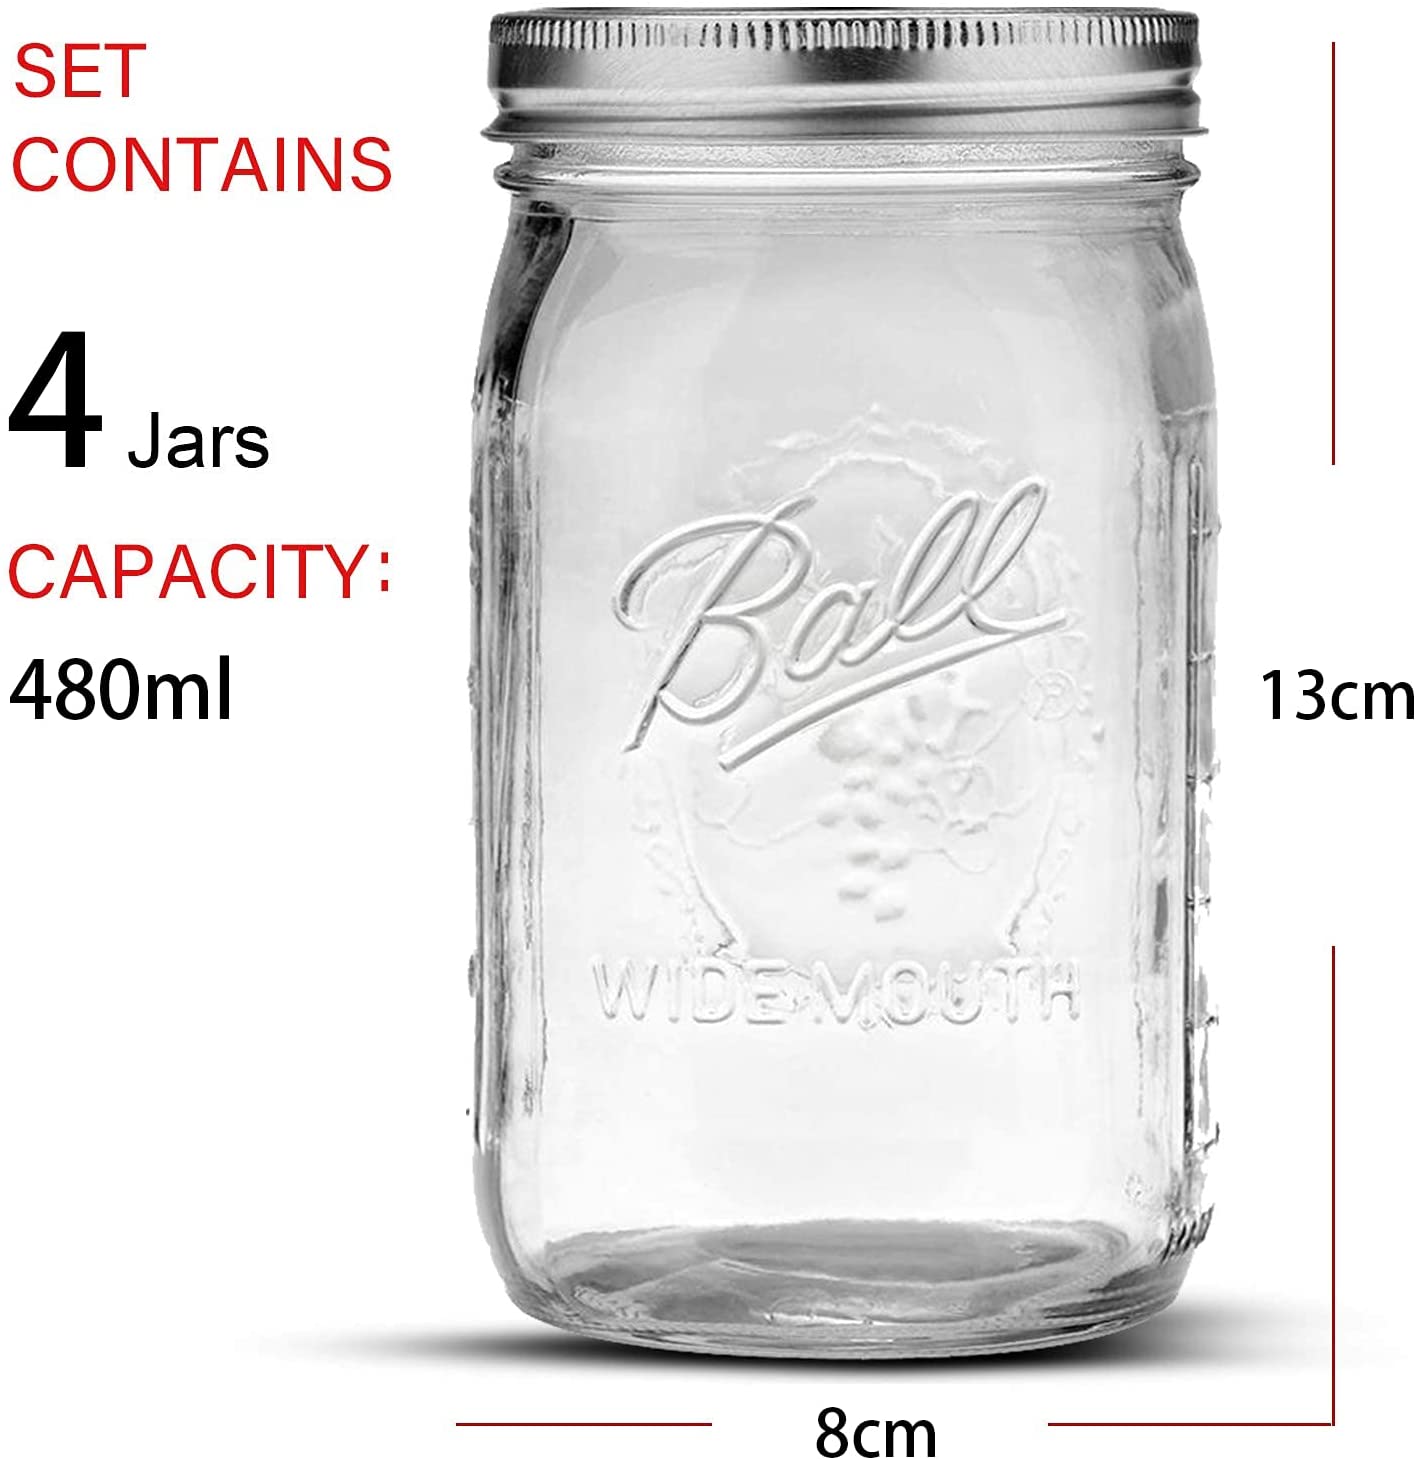 4 Pieces Canning Jars - 480ml Mason Jar Empty Glass Spice Bottles with Airtight Lids and Labels